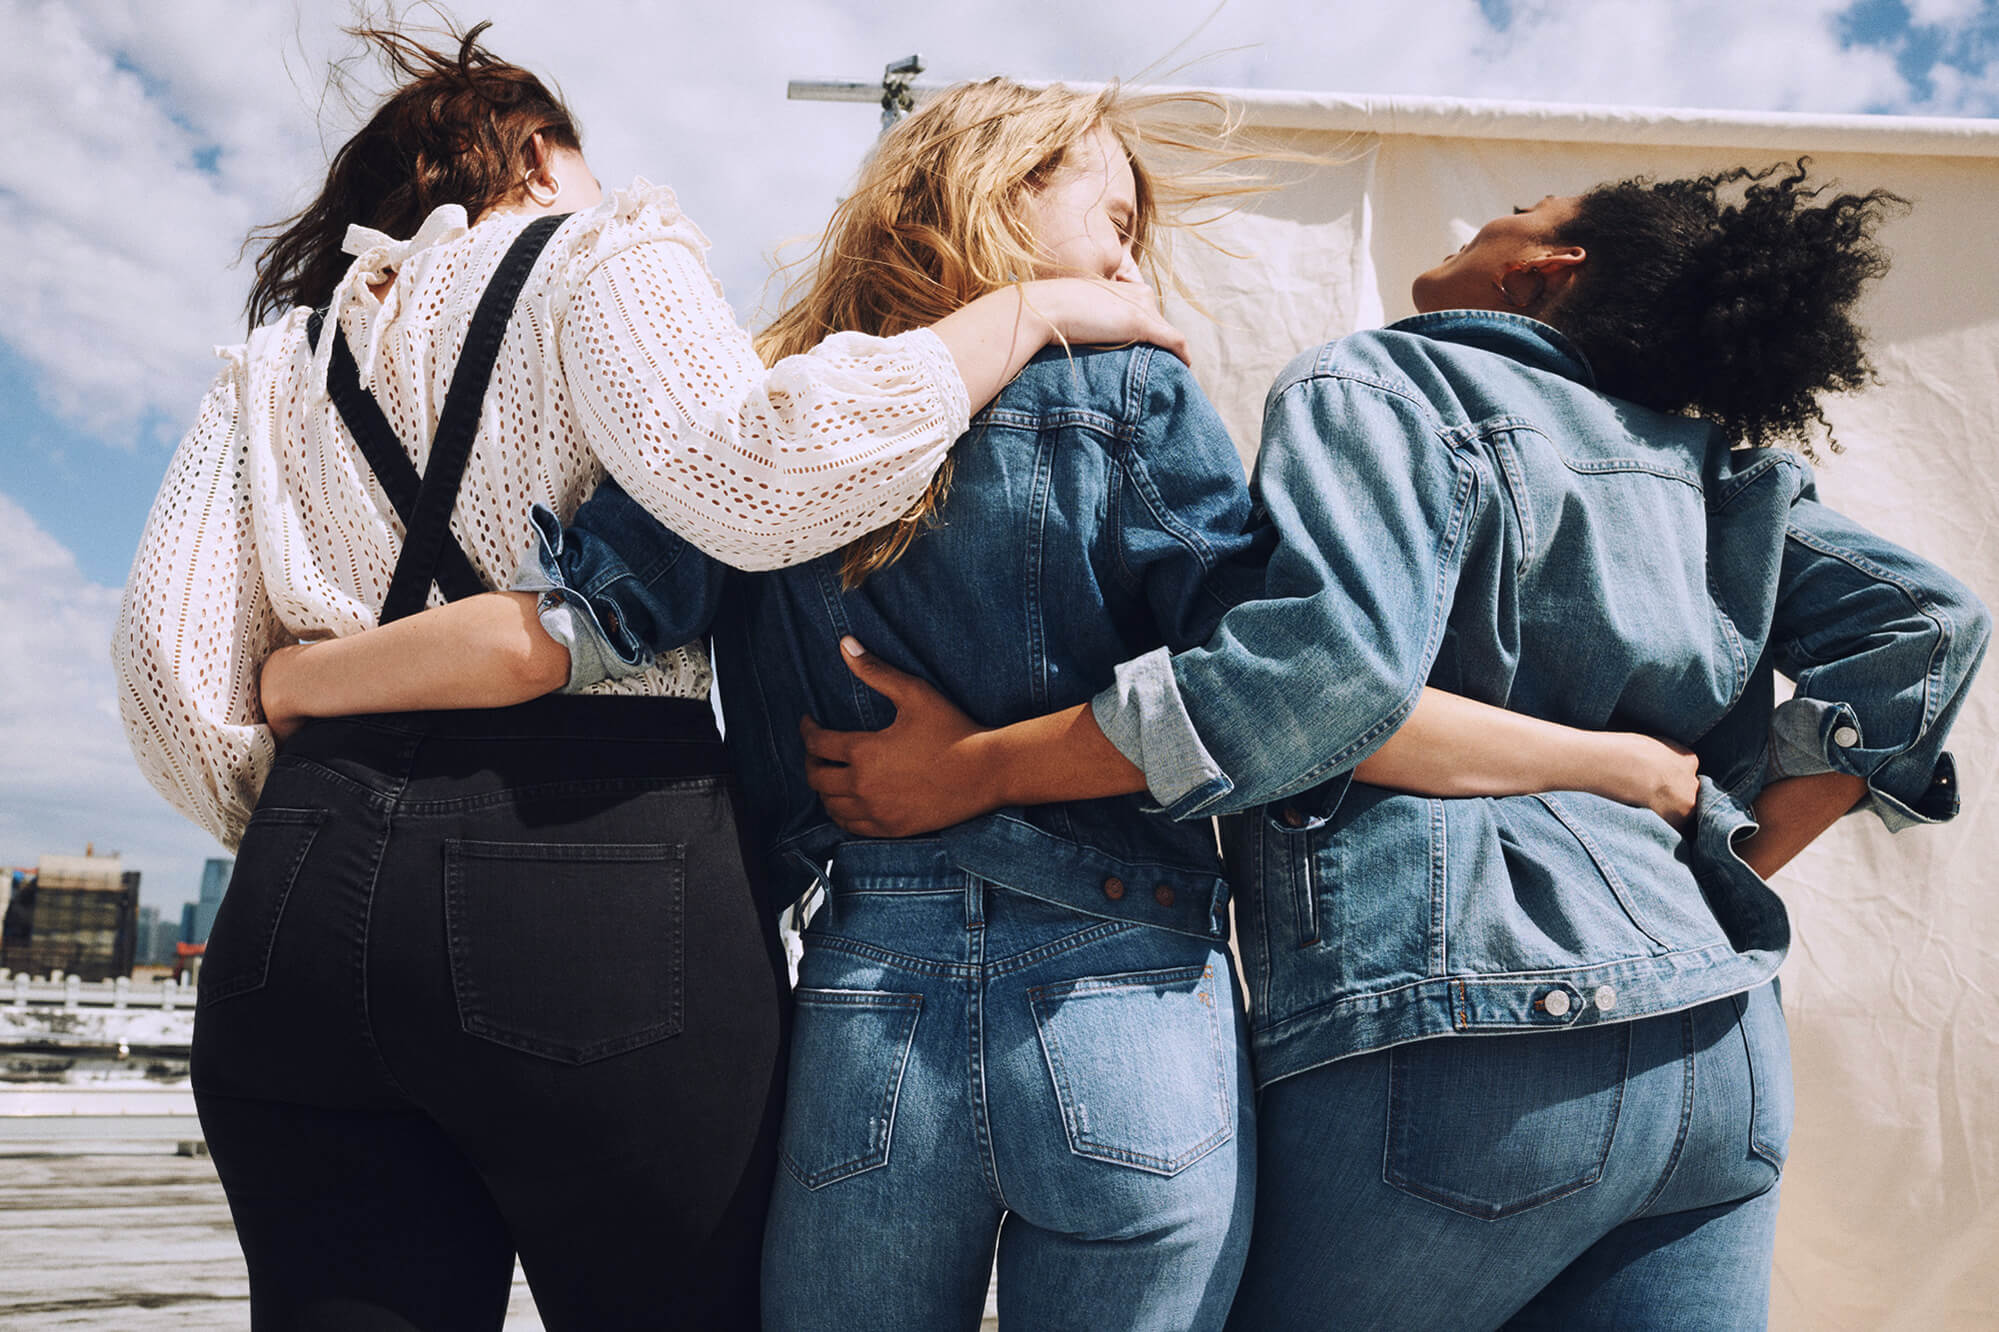 Madewell produces a line of eco-friendly denim jeans focused on showcasing their customer's lifestyle.